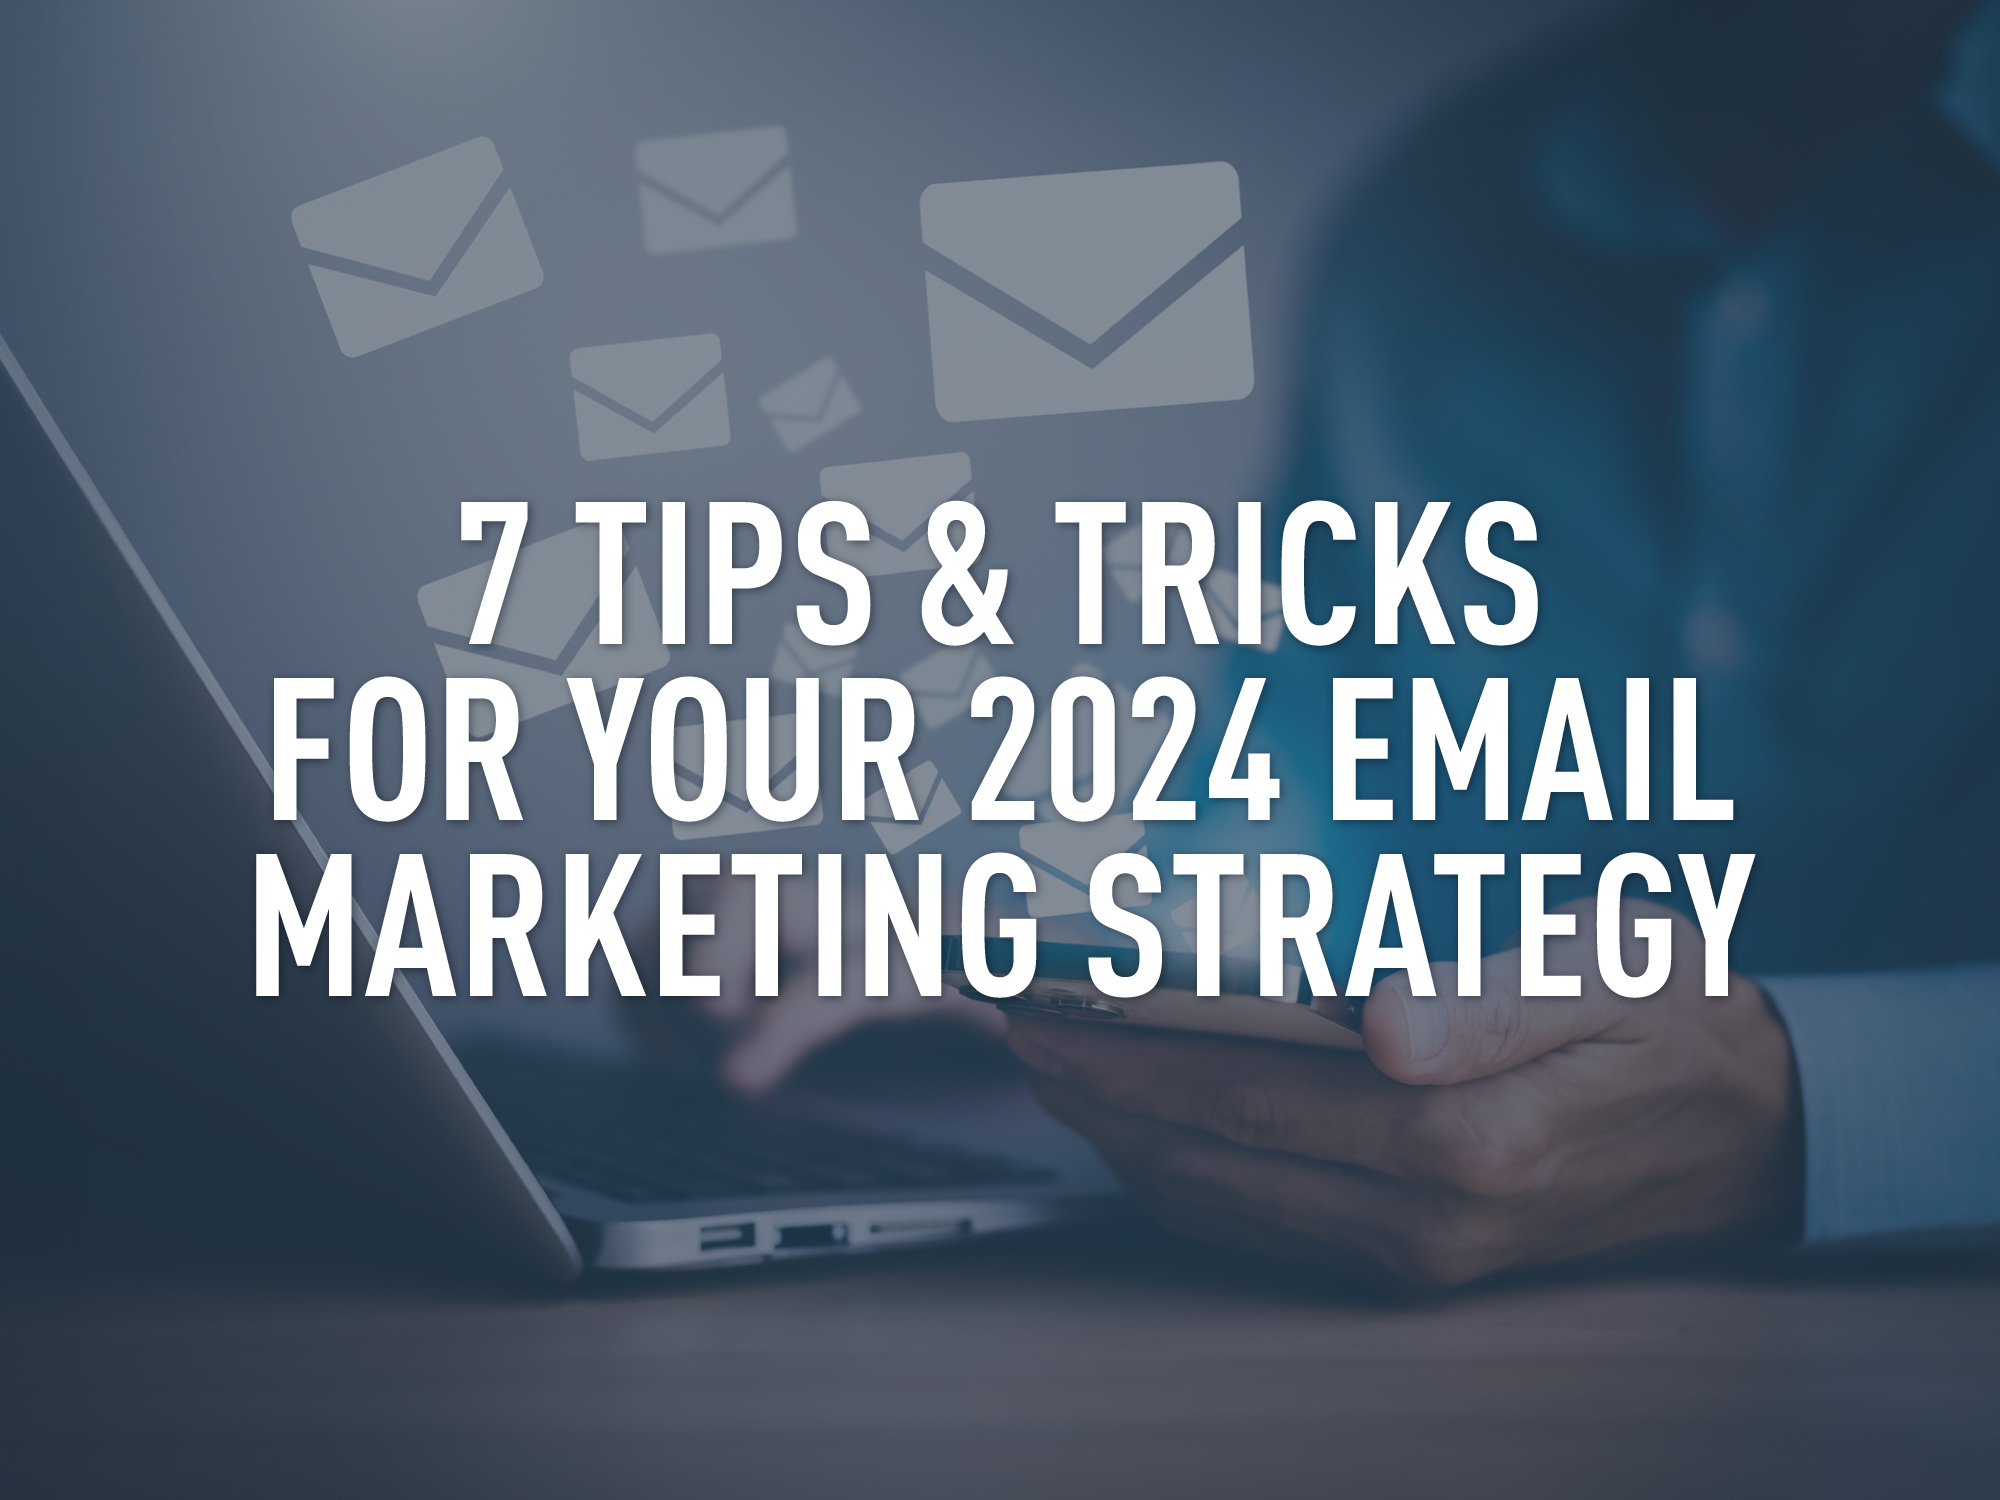 7 tips and tricks for your 2024 email marketing strategy